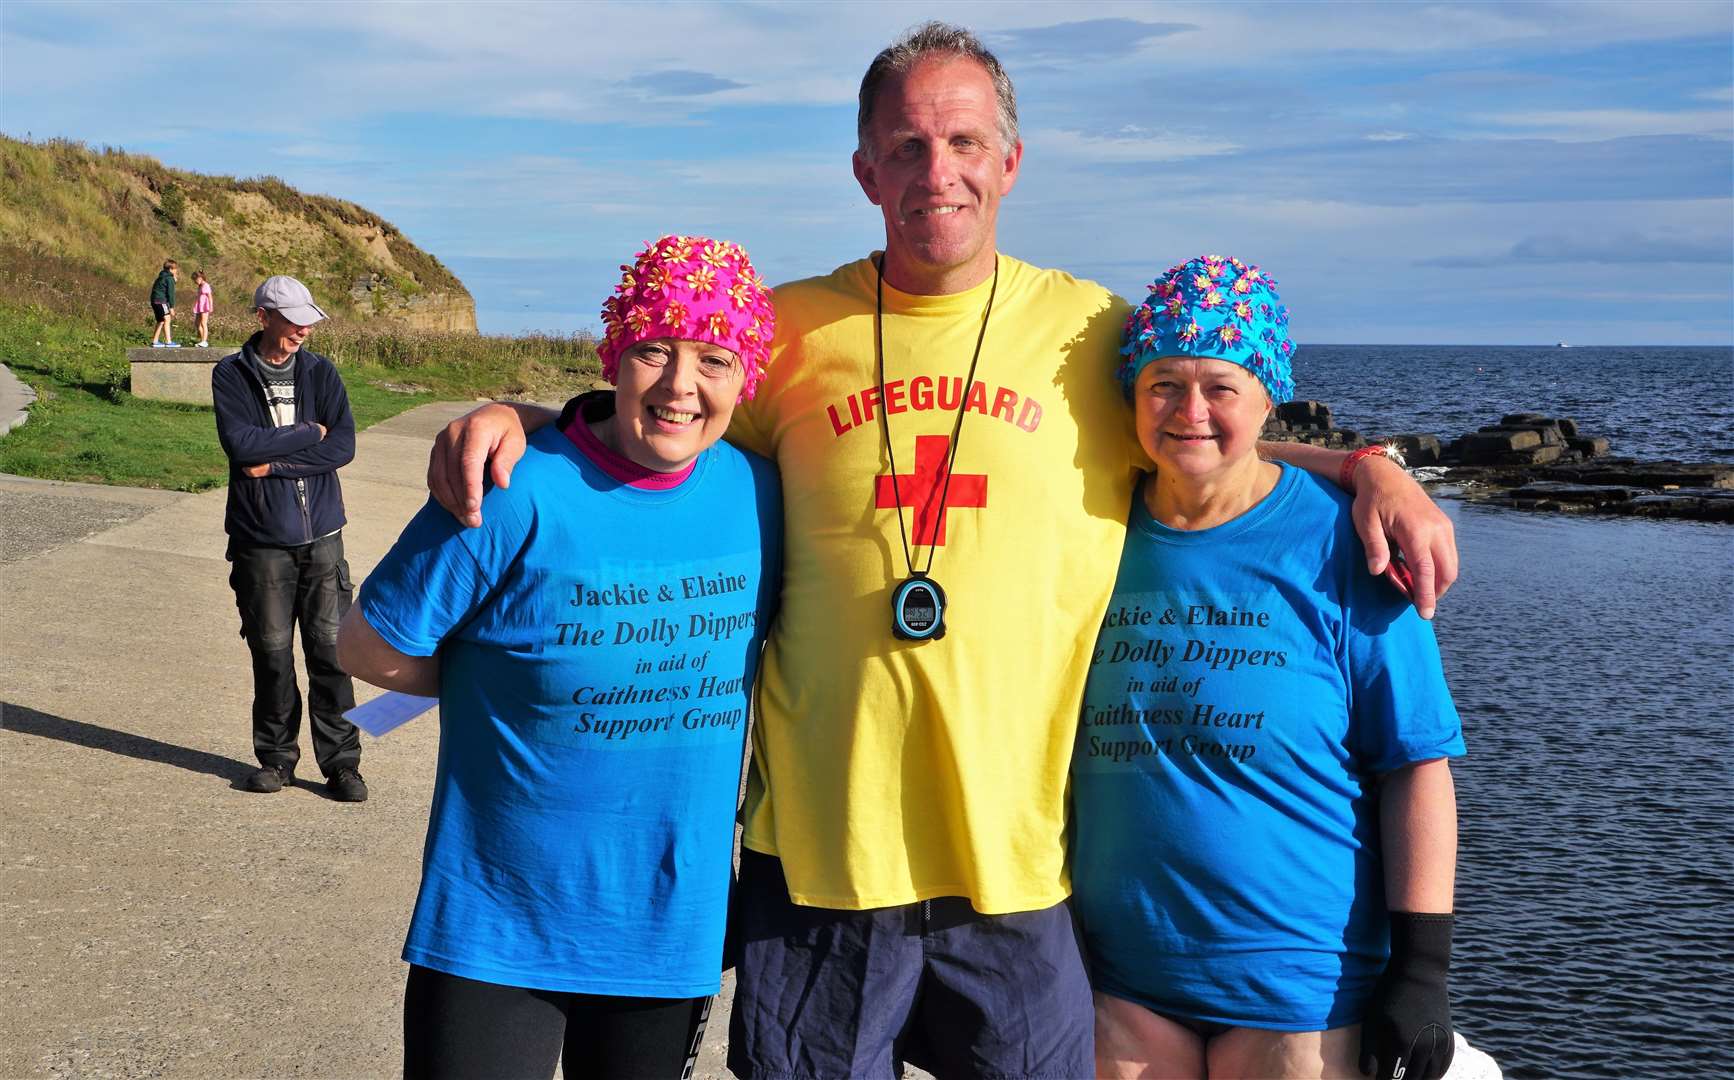 From left, Jacqueline Mackay, Alastair Ferrier, and Elaine Rosie. Alastair headed up a support team ferrying the two women around the various locations for their charity wild swimming fundraiser. Picture: DGS